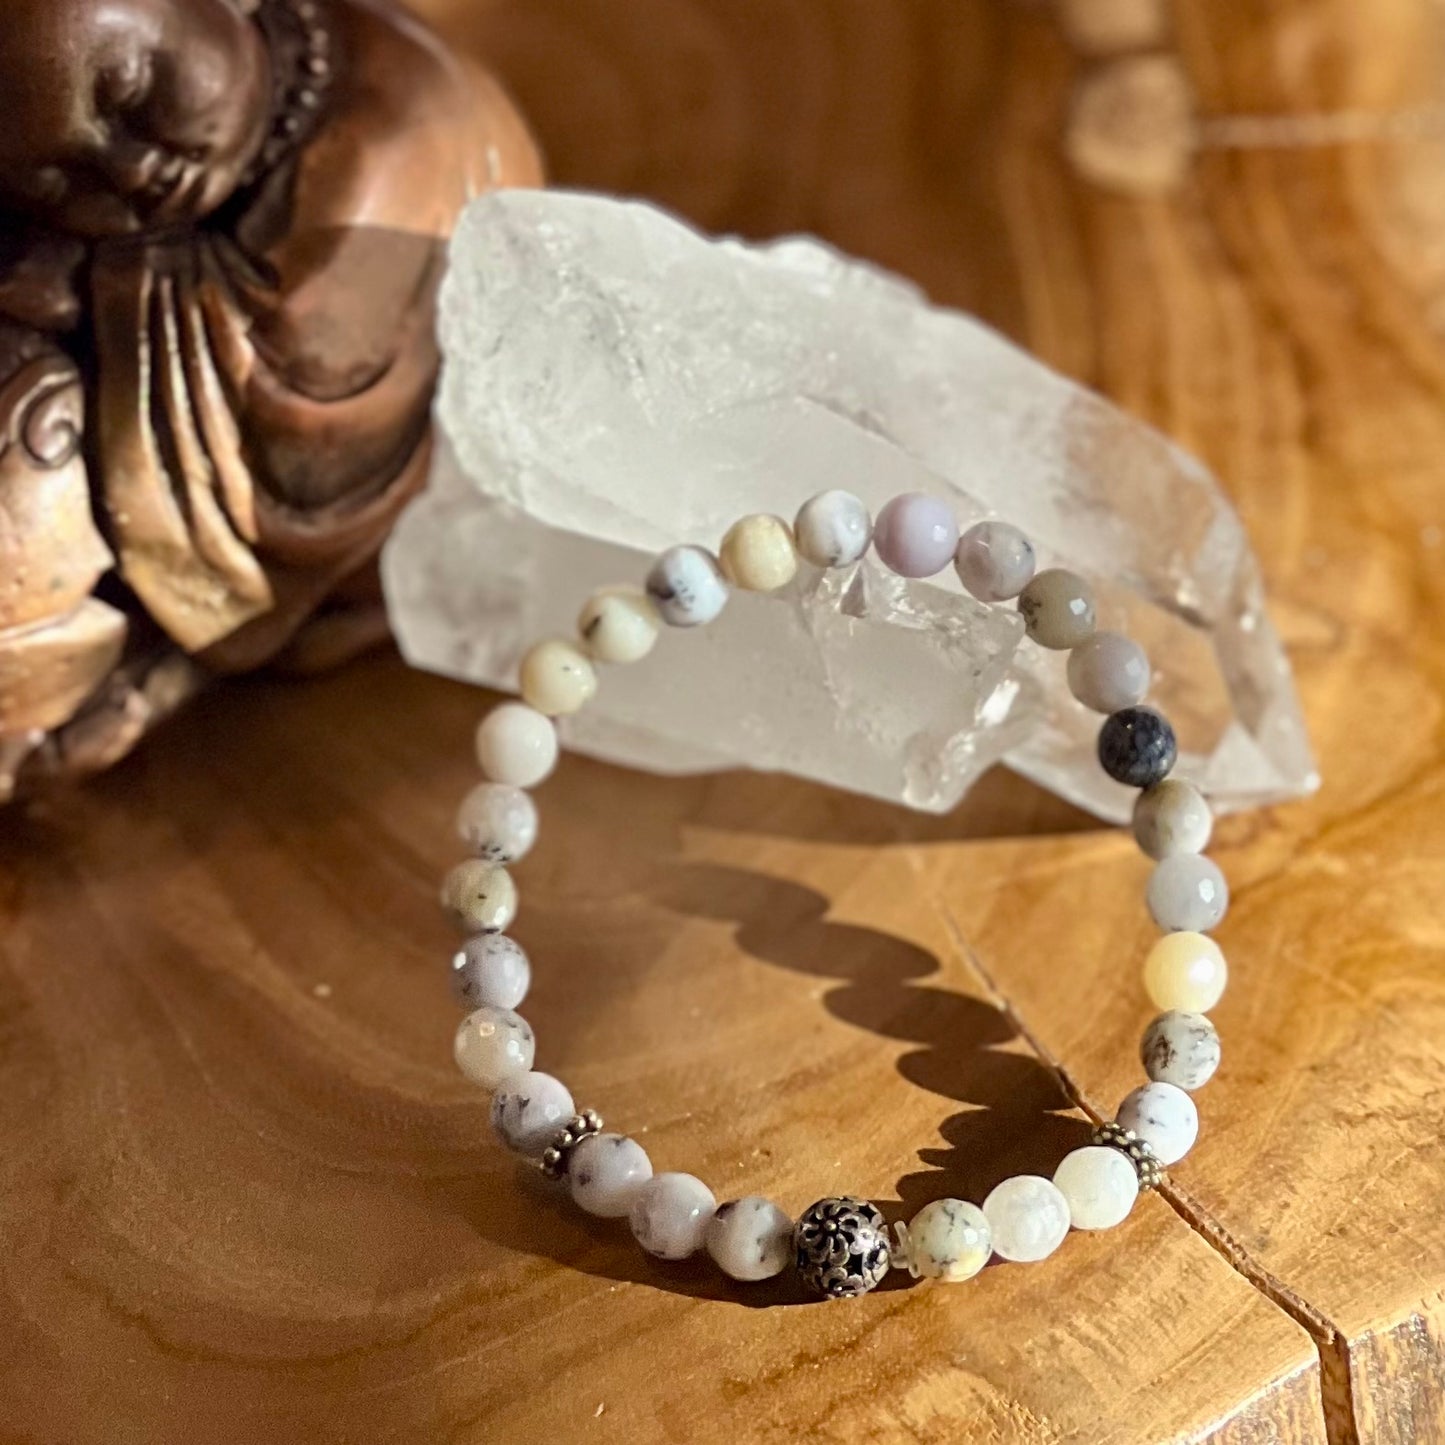 White Opal Bracelet with a sterling silver accent bead